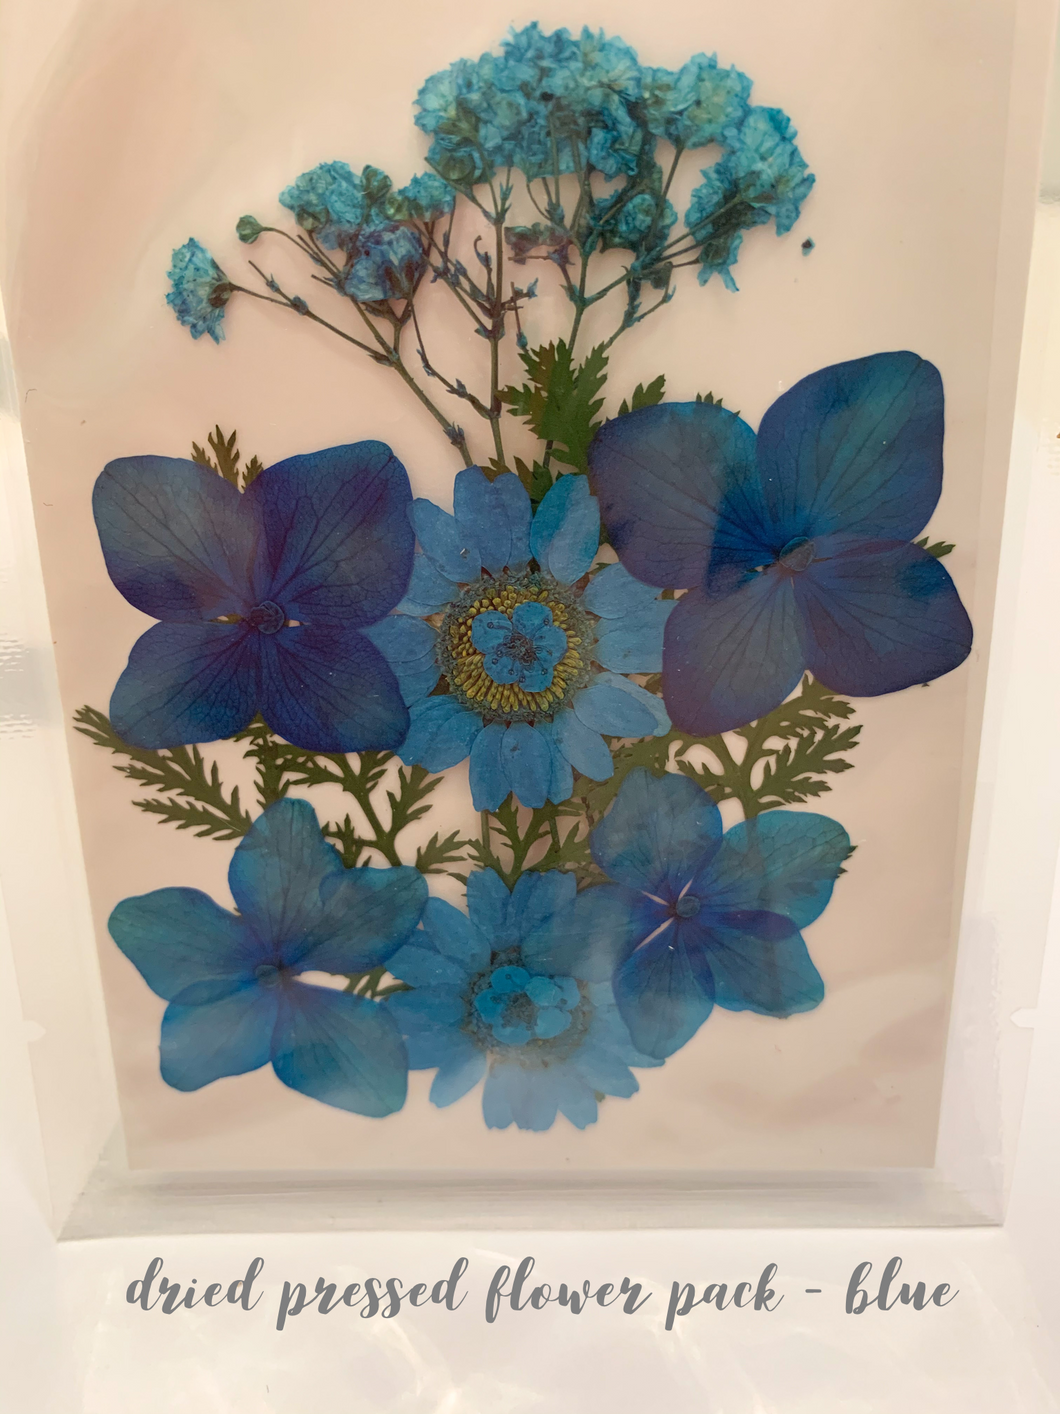 Small Dried Pressed Flower Pack - Blue